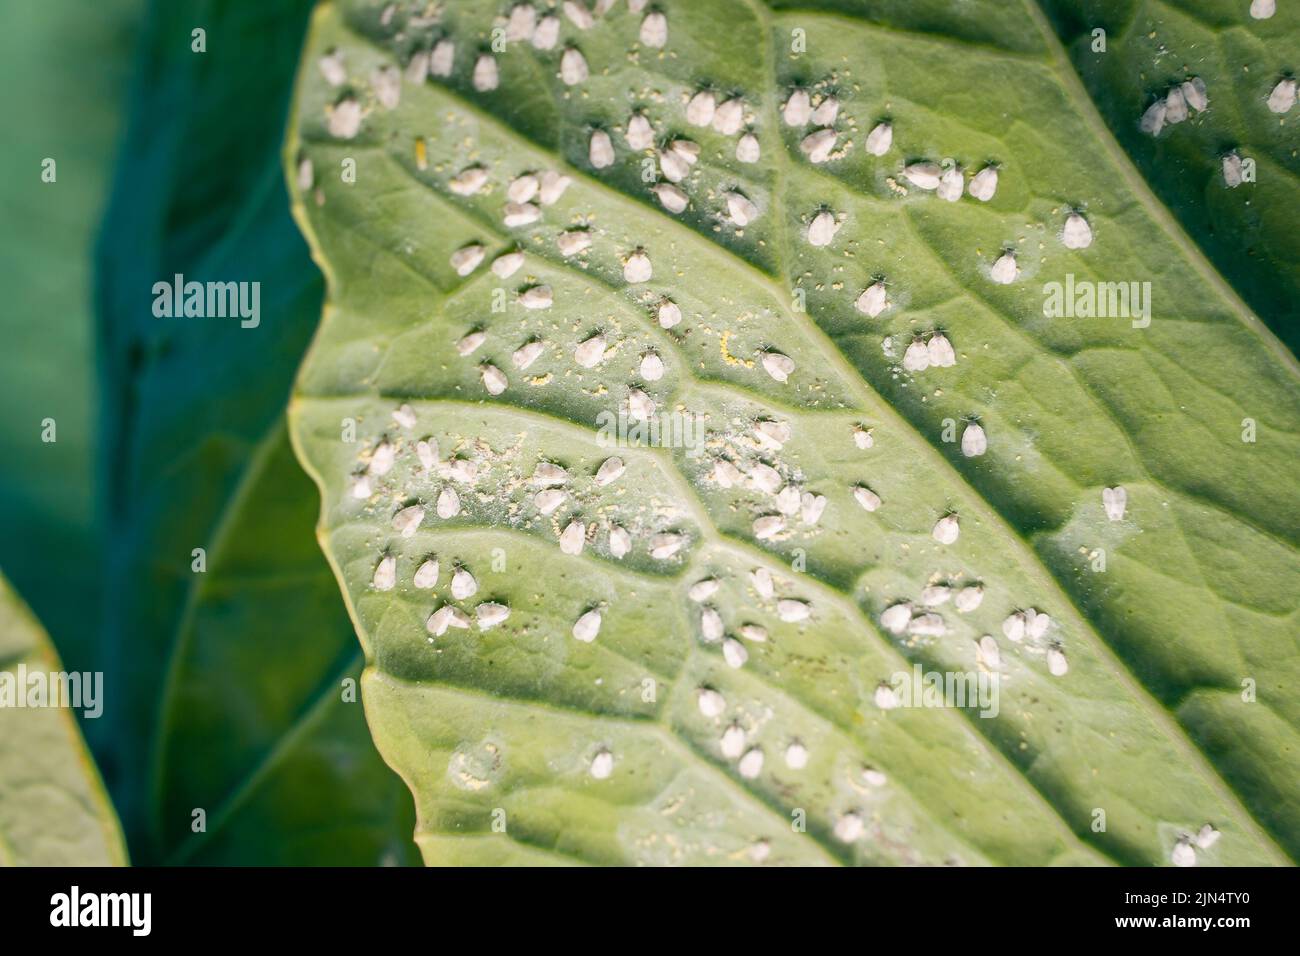 A lot of white flies covered a leaf of a growing white cabbage close-up. Whiteflies on the underside of green cabbage Stock Photo